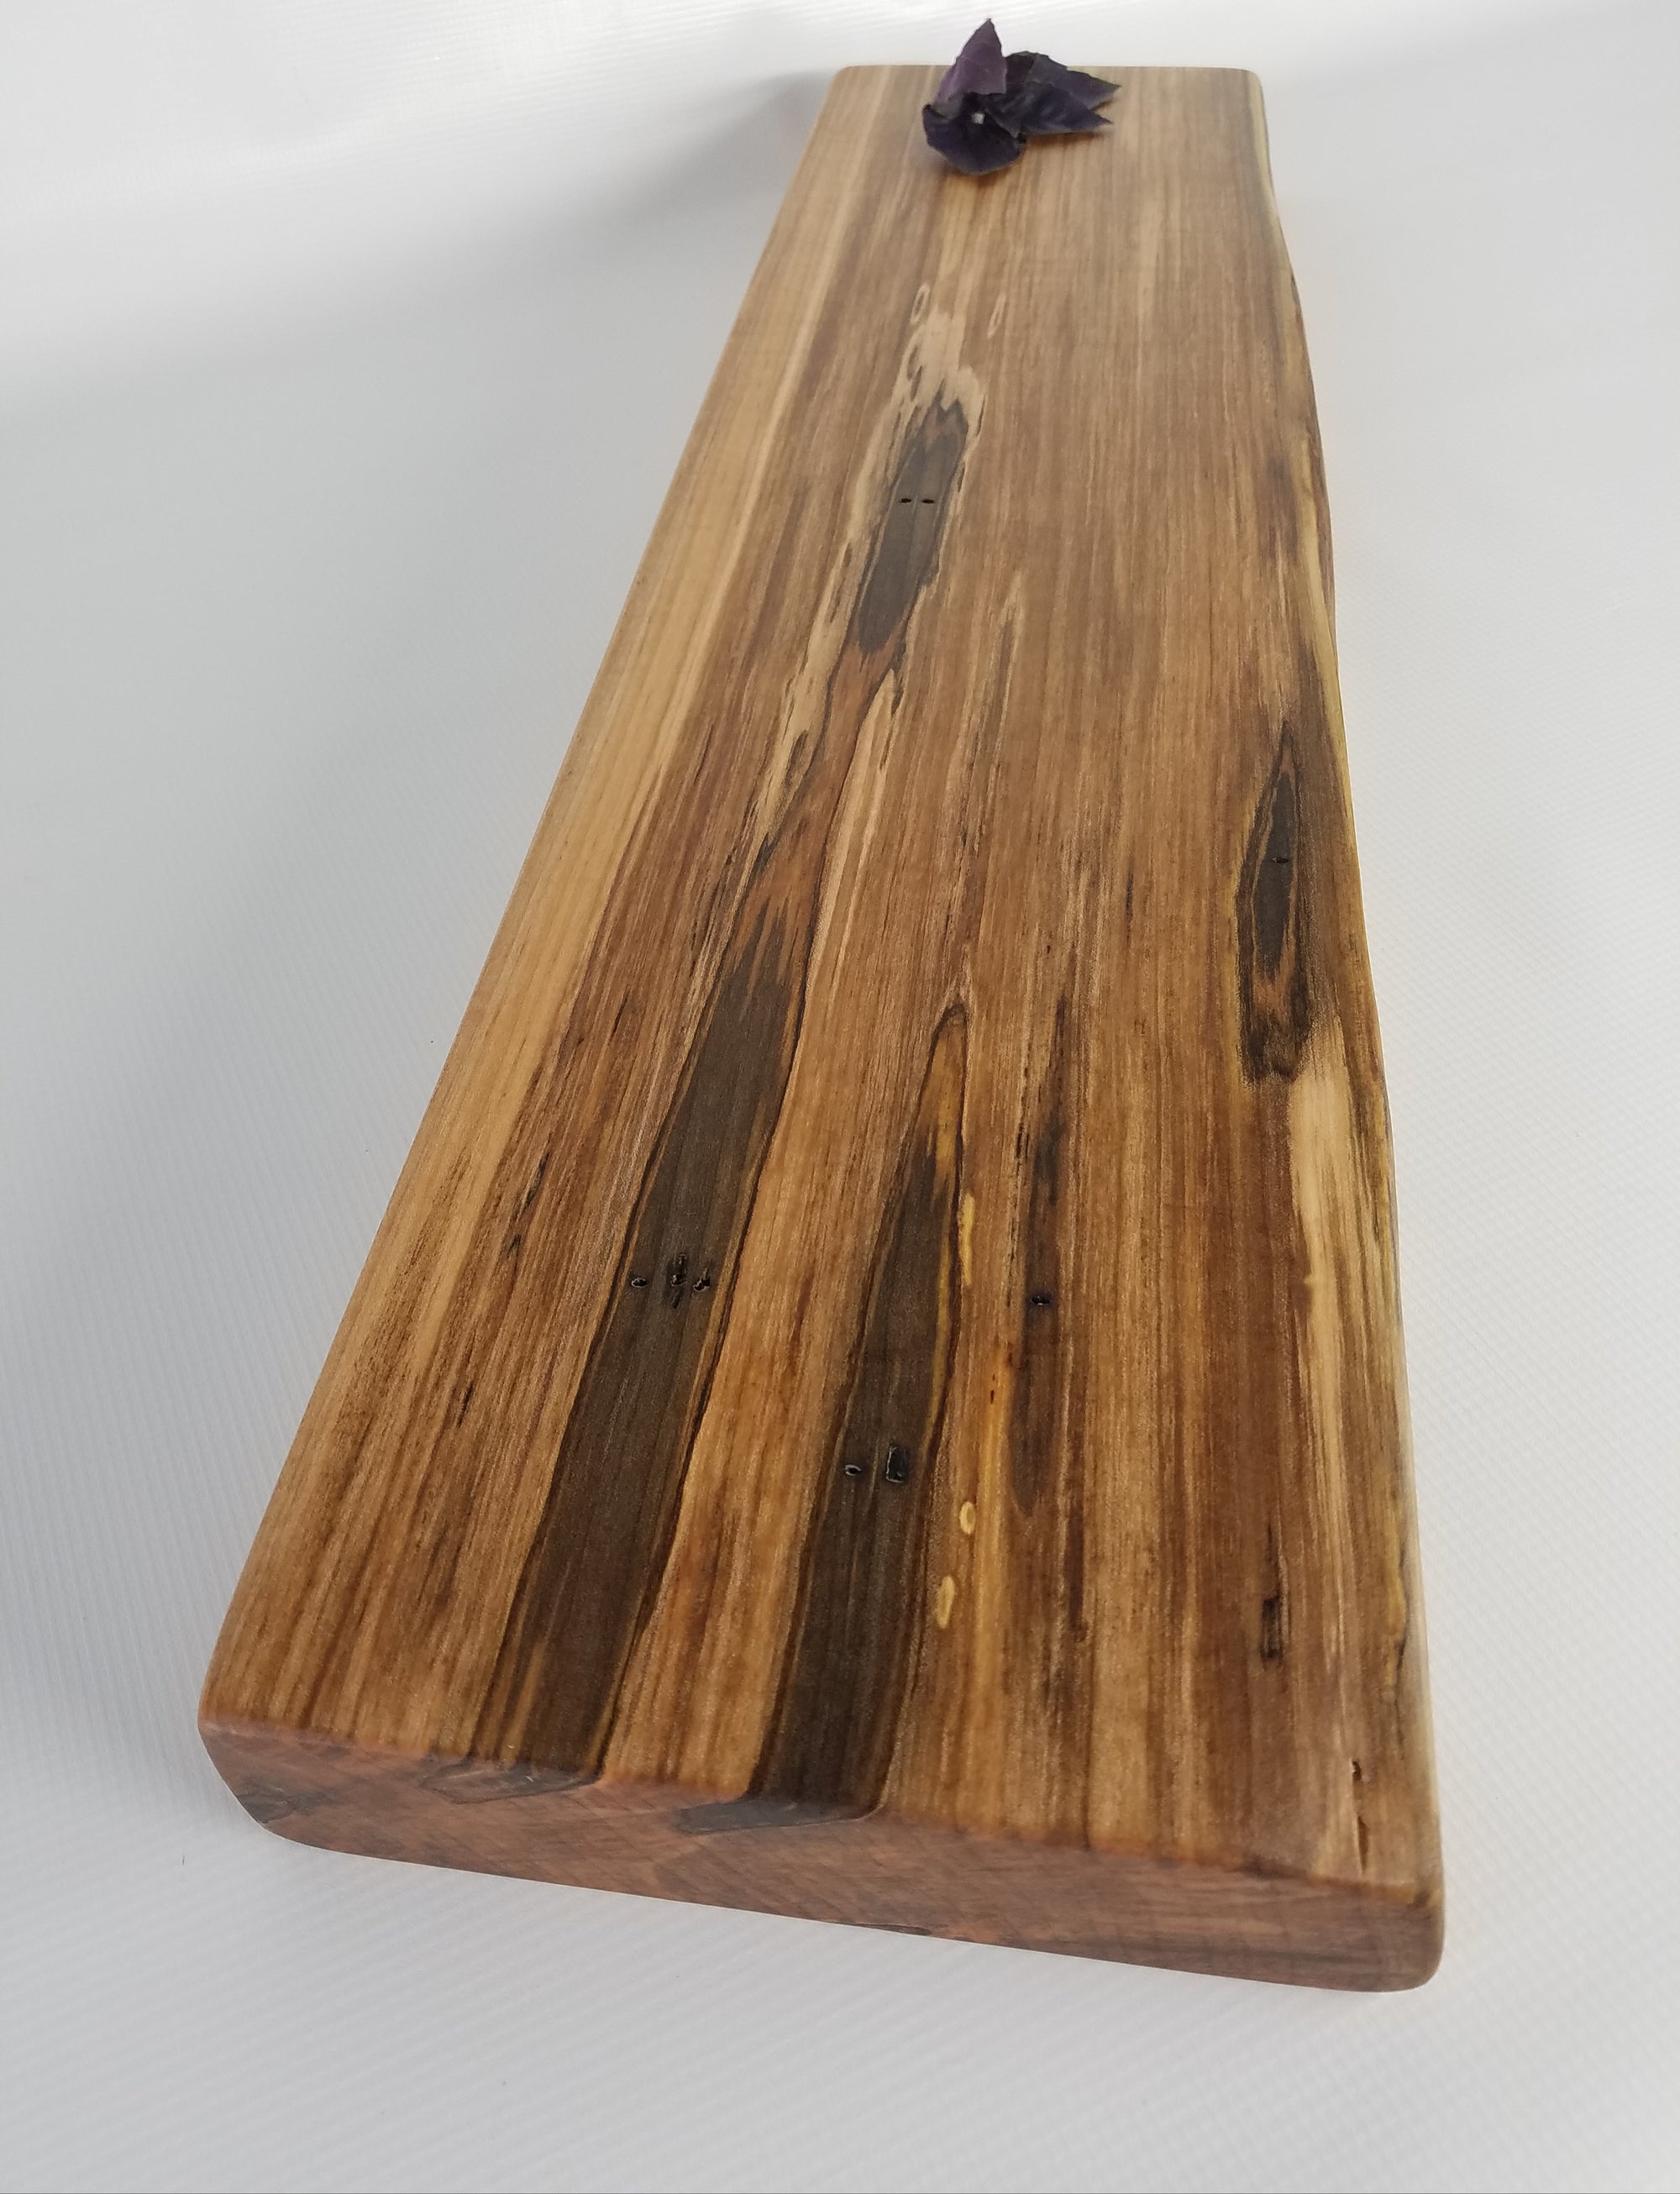 Large Wood Charcuterie Board - Thick Hardwood Serving Board